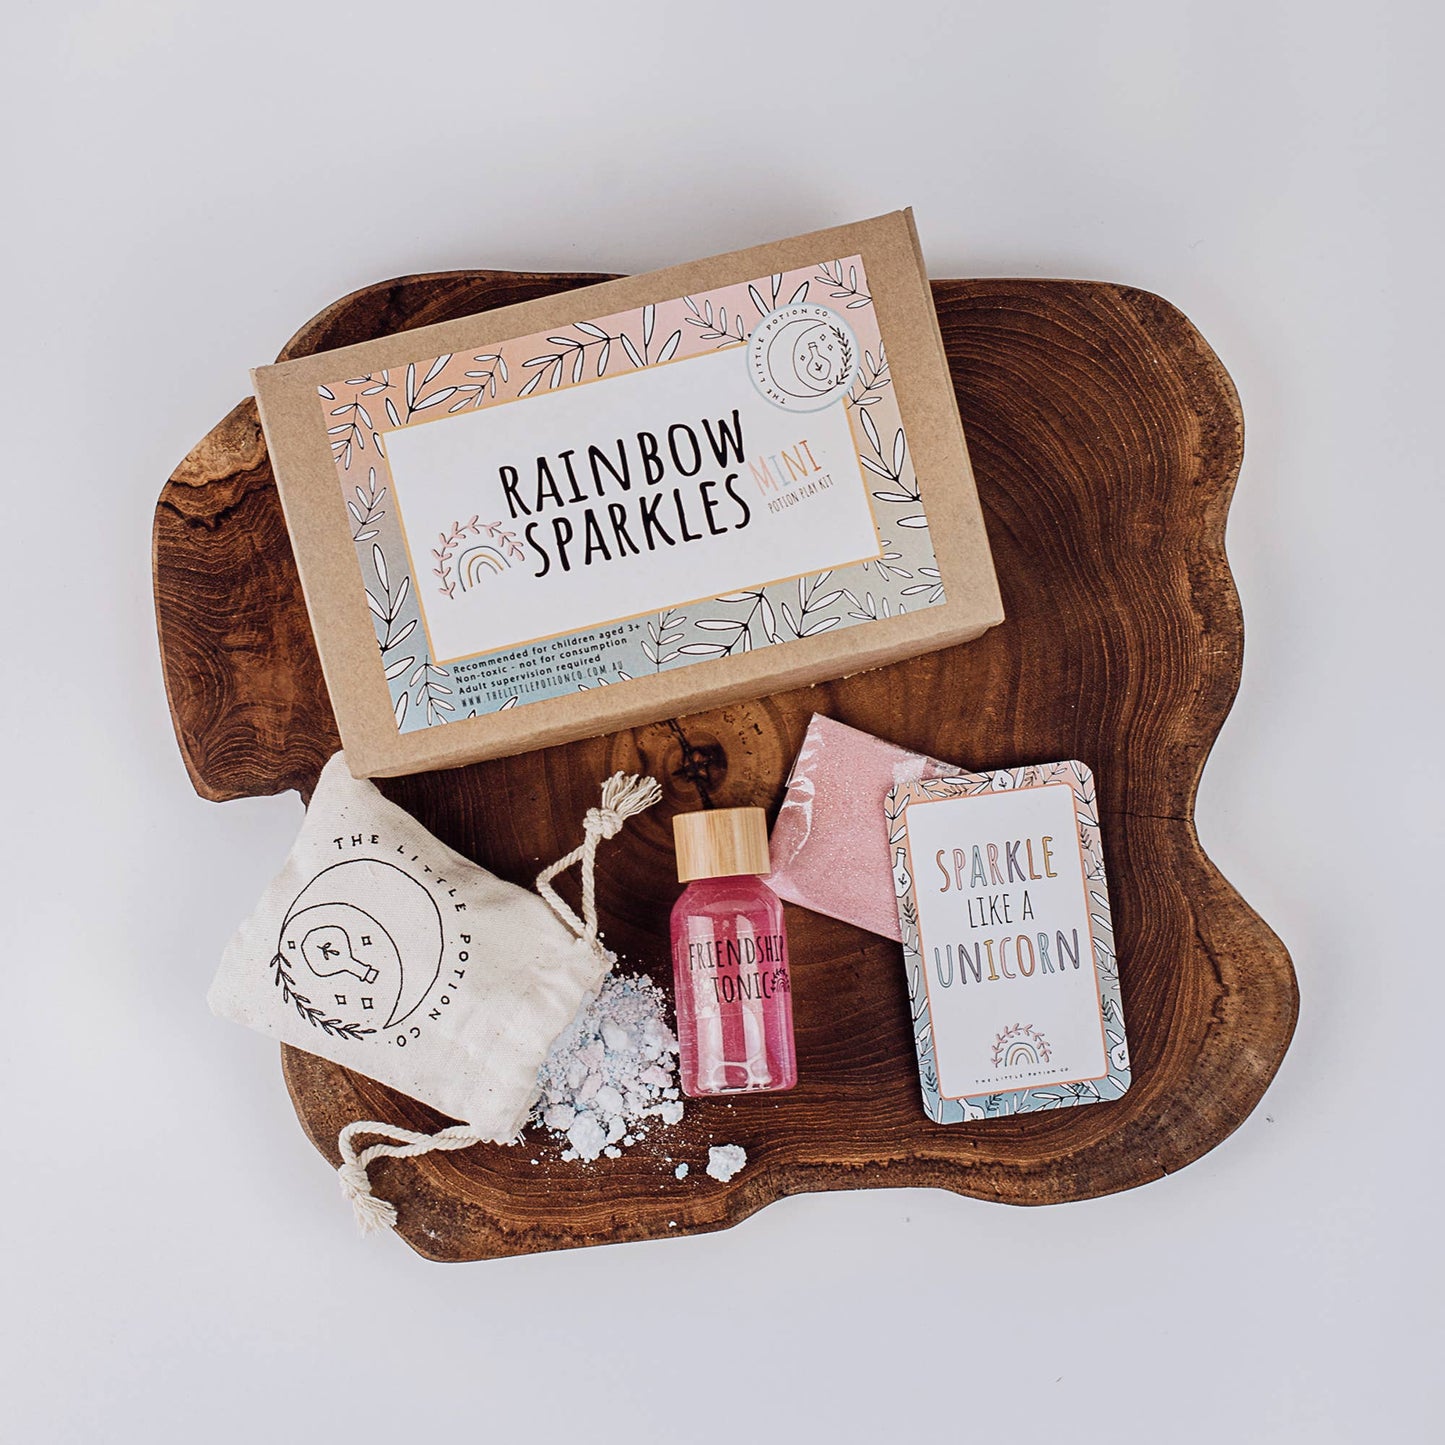  These mini kits allow children to explore the wonders of magic, and are perfect for learning how to express themselves.  This Sparkly mini kit is for those who dream of meeting a unicorn and wish on rainbows. Create potions for Love, friendship and hope with this kit. 